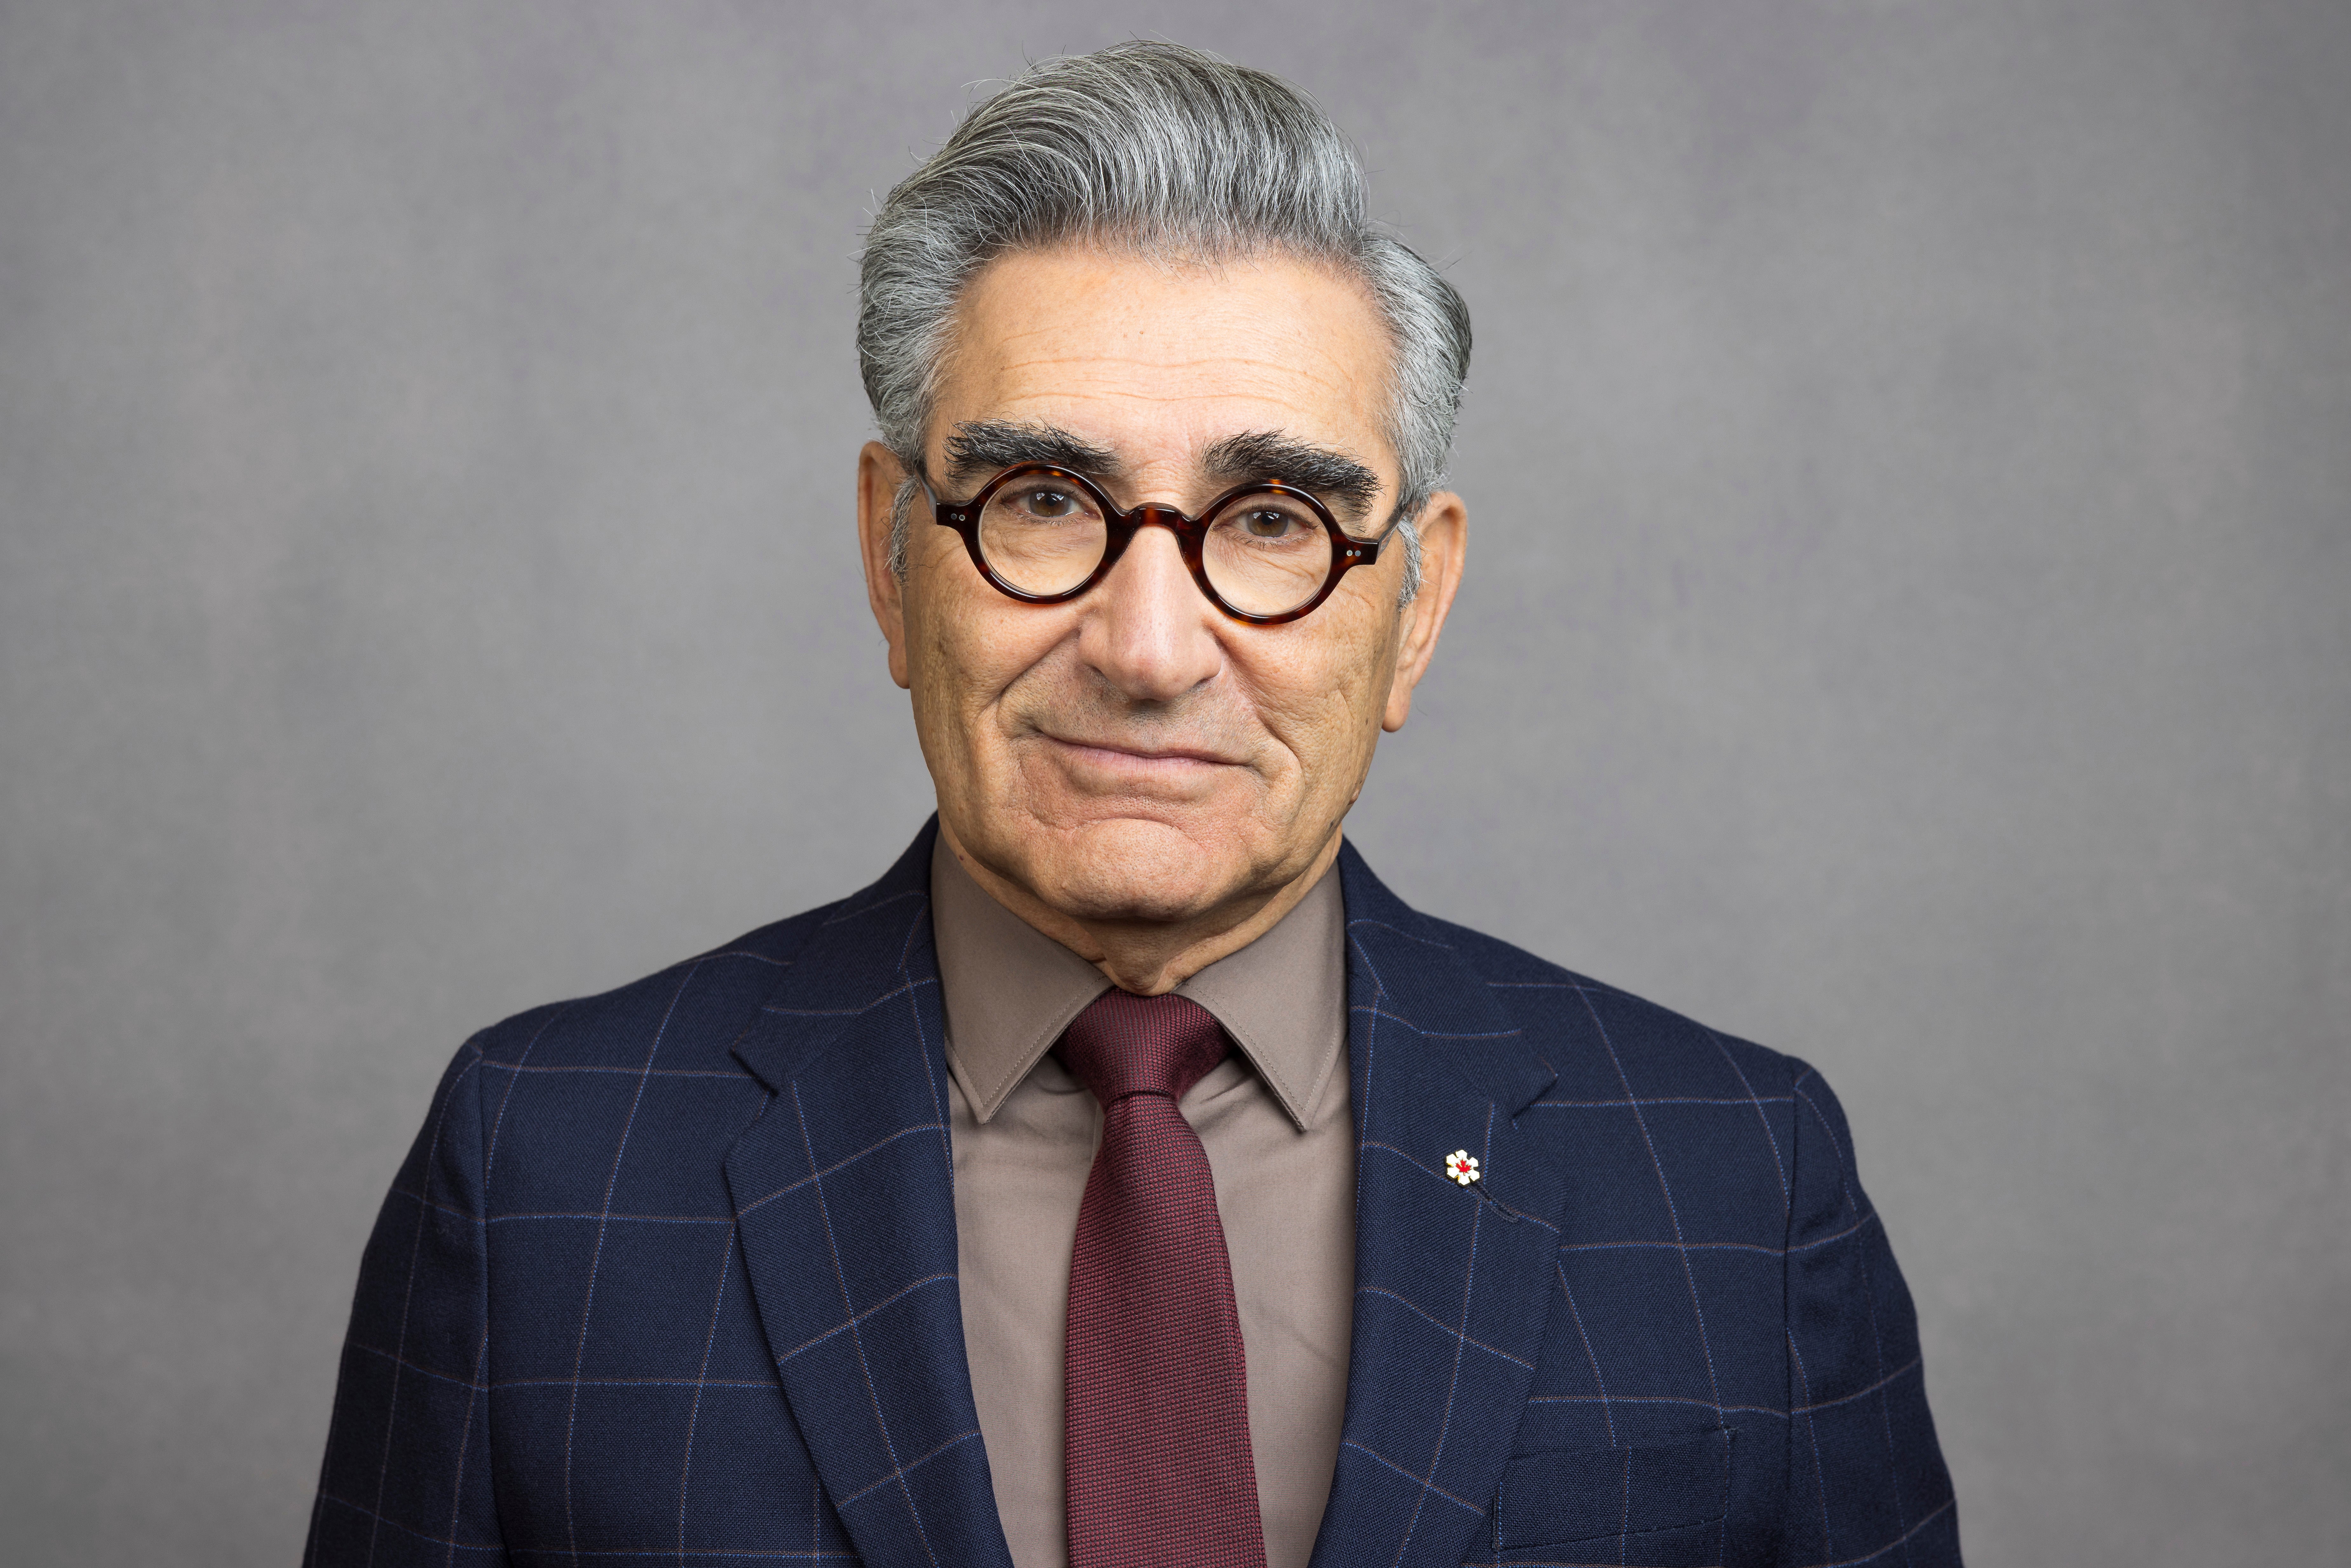 Eugene Levy returns (hesitantly) to another season of travelling the world in Apple TV+’s ‘The Reluctant Traveller’